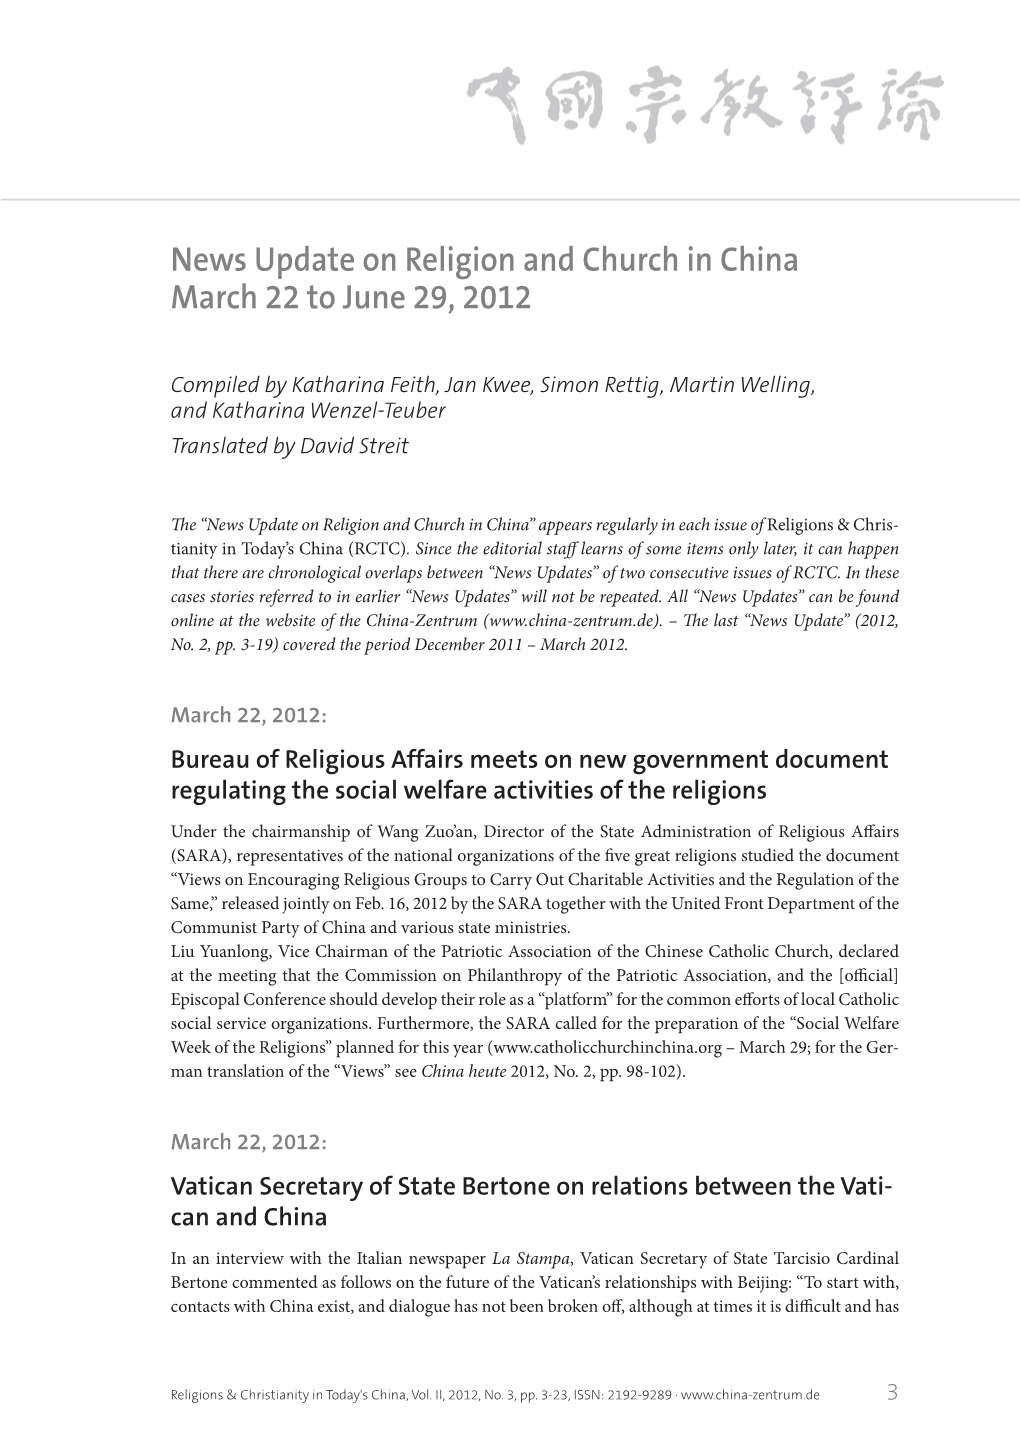 News Update on Religion and Church in China March 22 to June 29, 2012